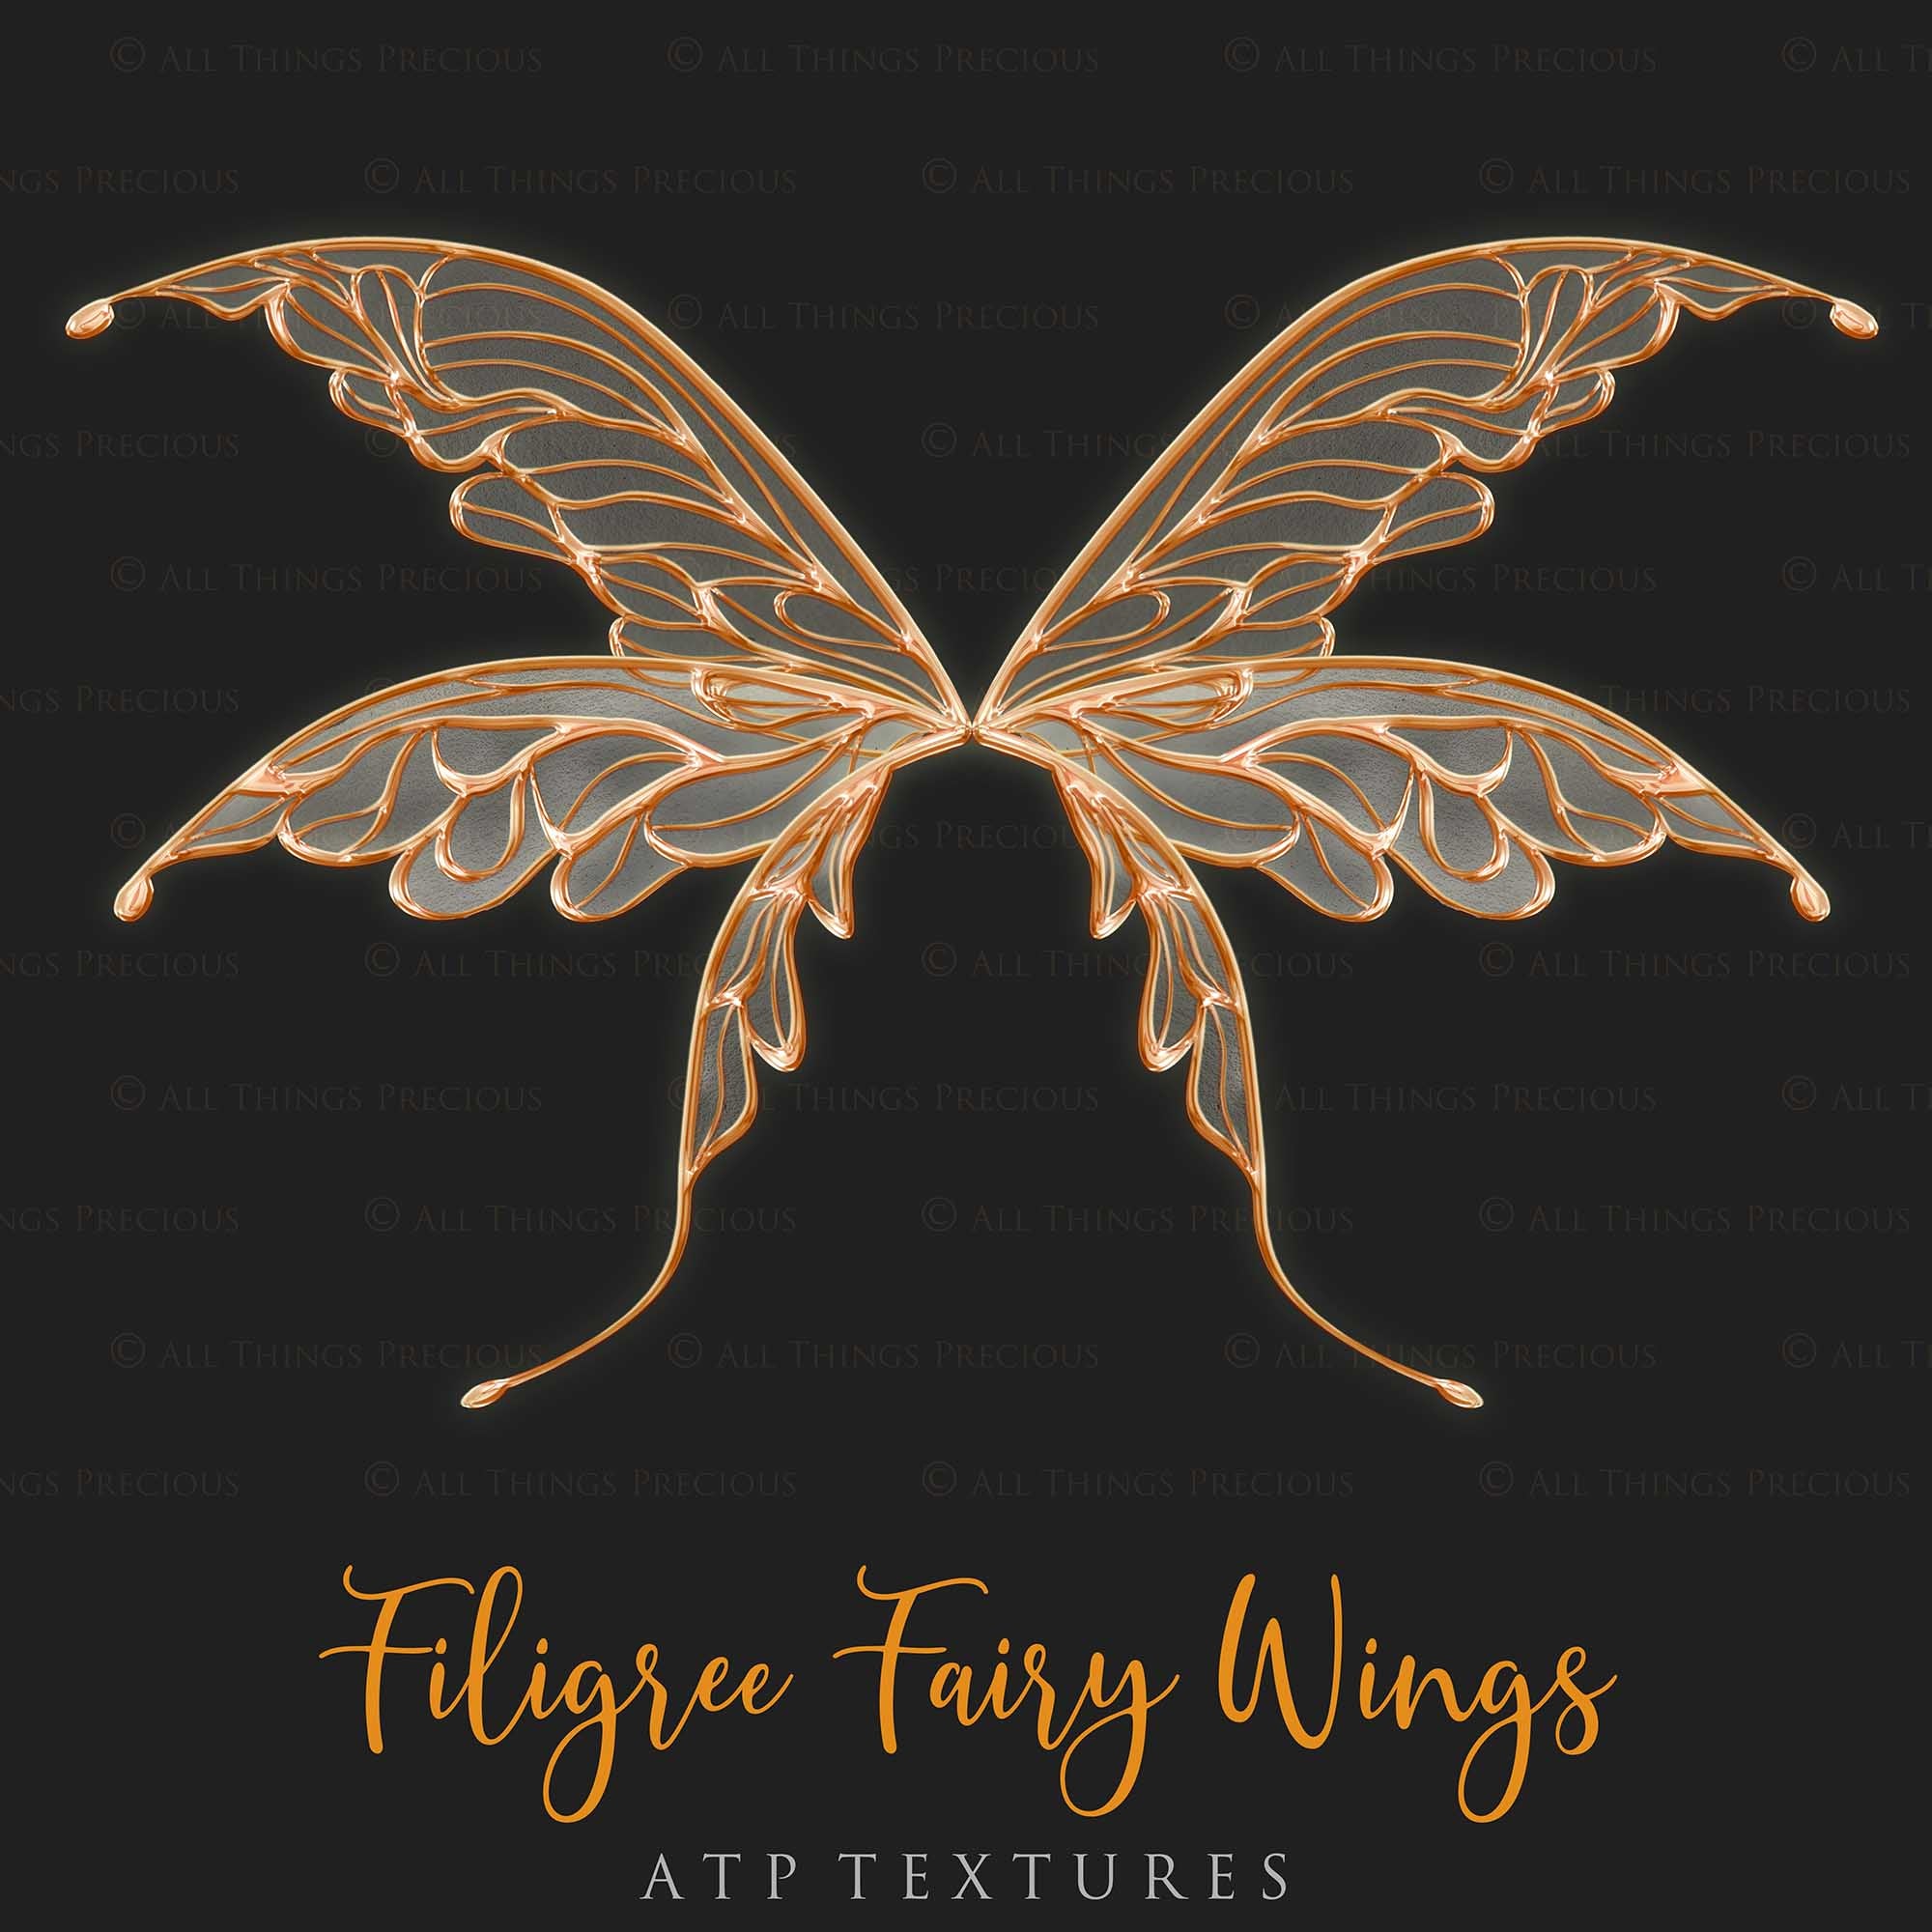 Digital Faery Wing Overlays! Fairy wings, Png overlays for photoshop. Photography editing. High resolution, 300dpi fairy wings. Overlays for photography. Digital stock and resources. Graphic design. Fairy Photos. Colourful Fairy wings. Faerie Wings.